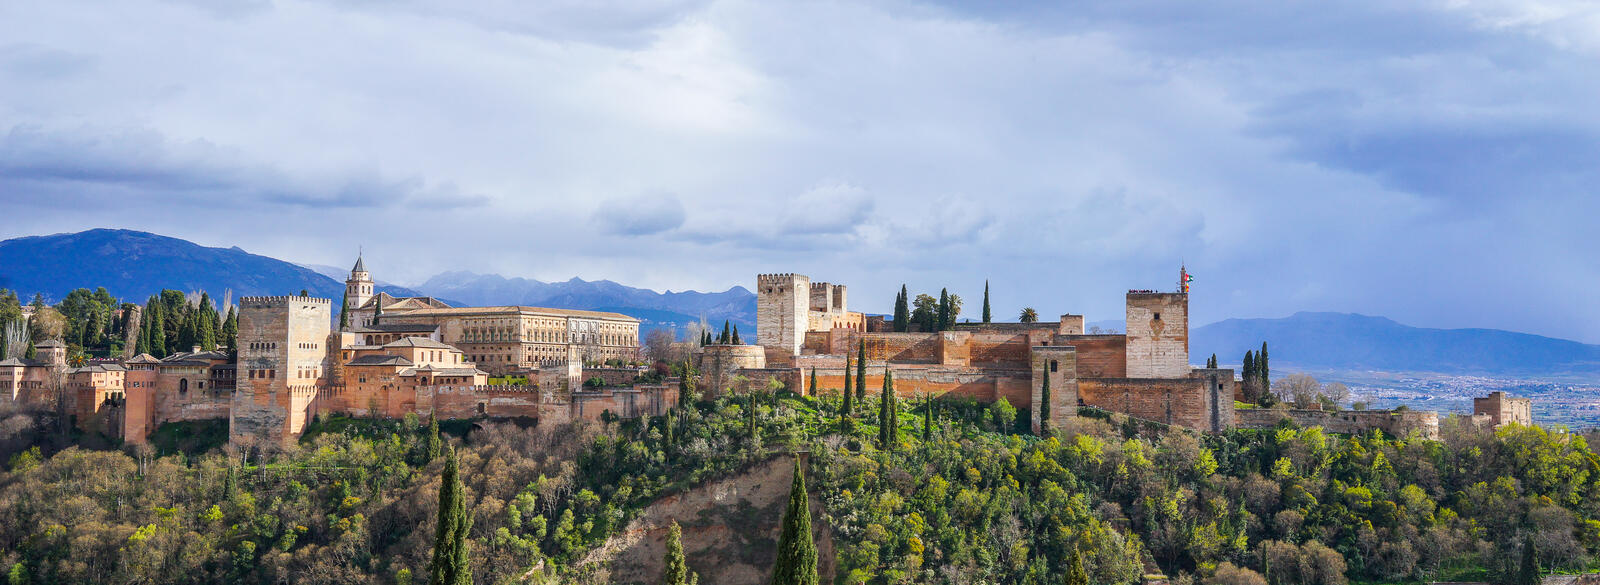 Wallpapers Alhambra Spain panorama on the desktop